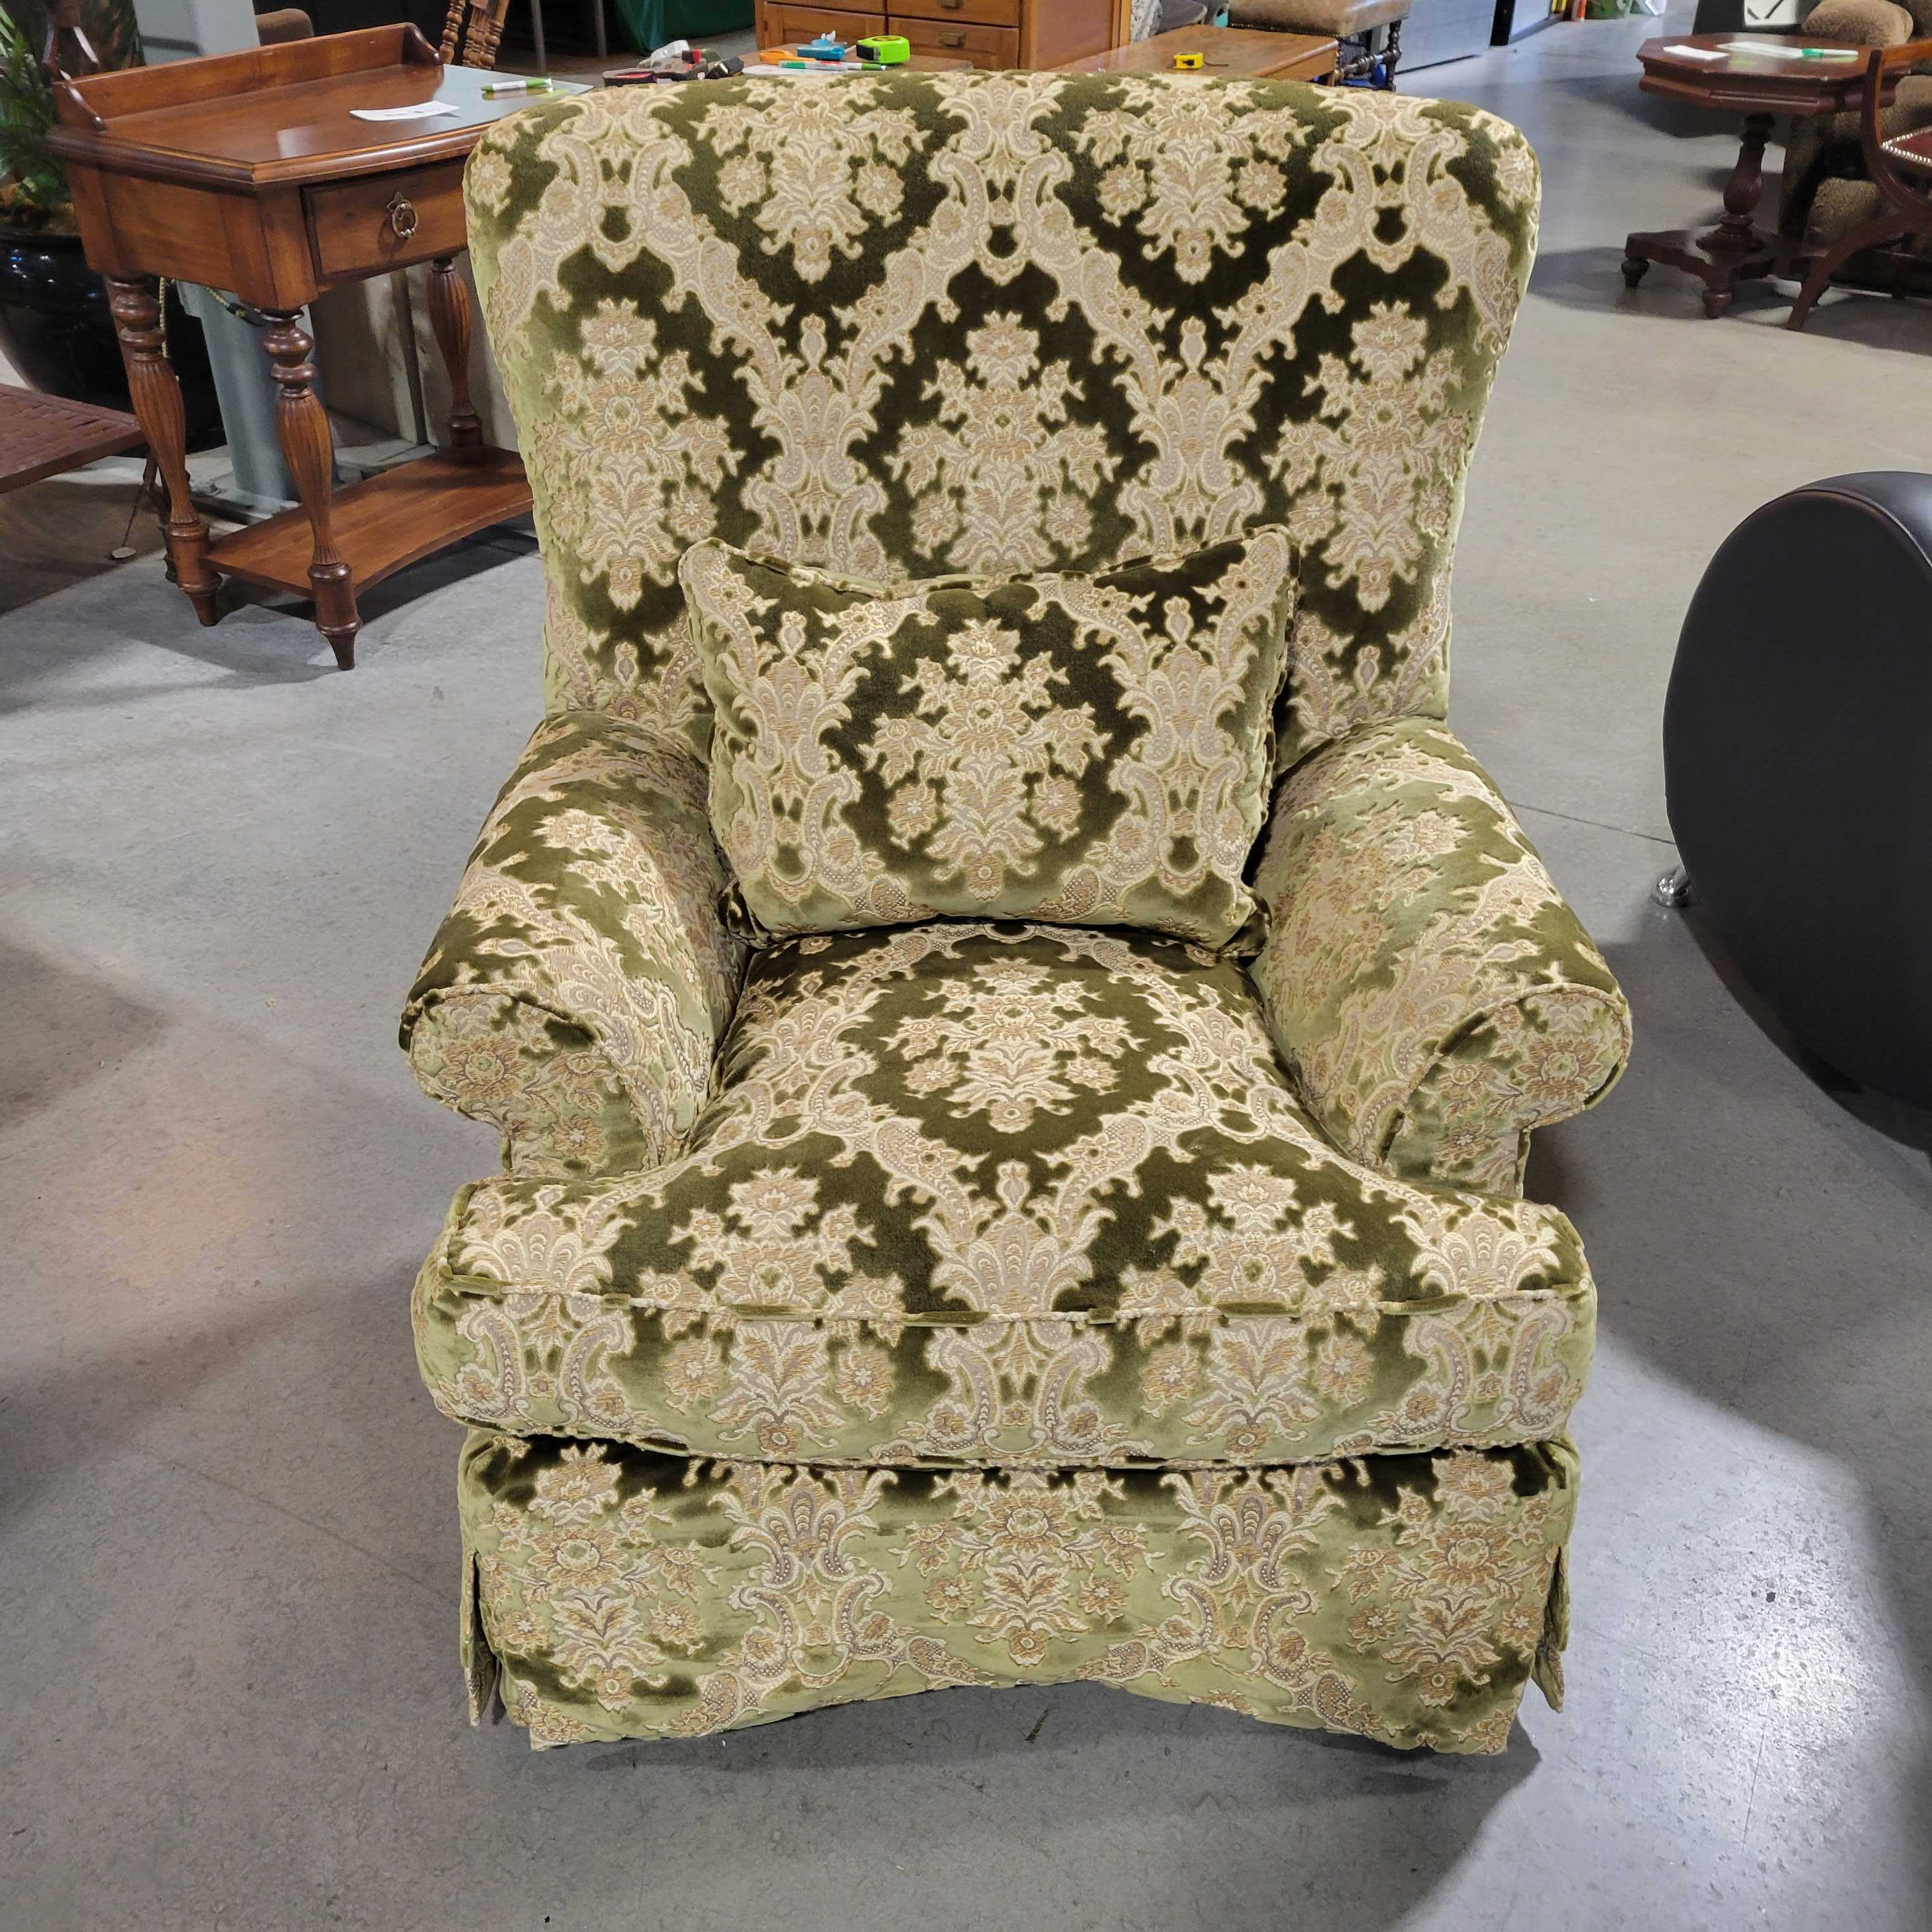 Hanson Collection Ornate Upholstered Gold and Green Down with Accent Pillow Highback Chair